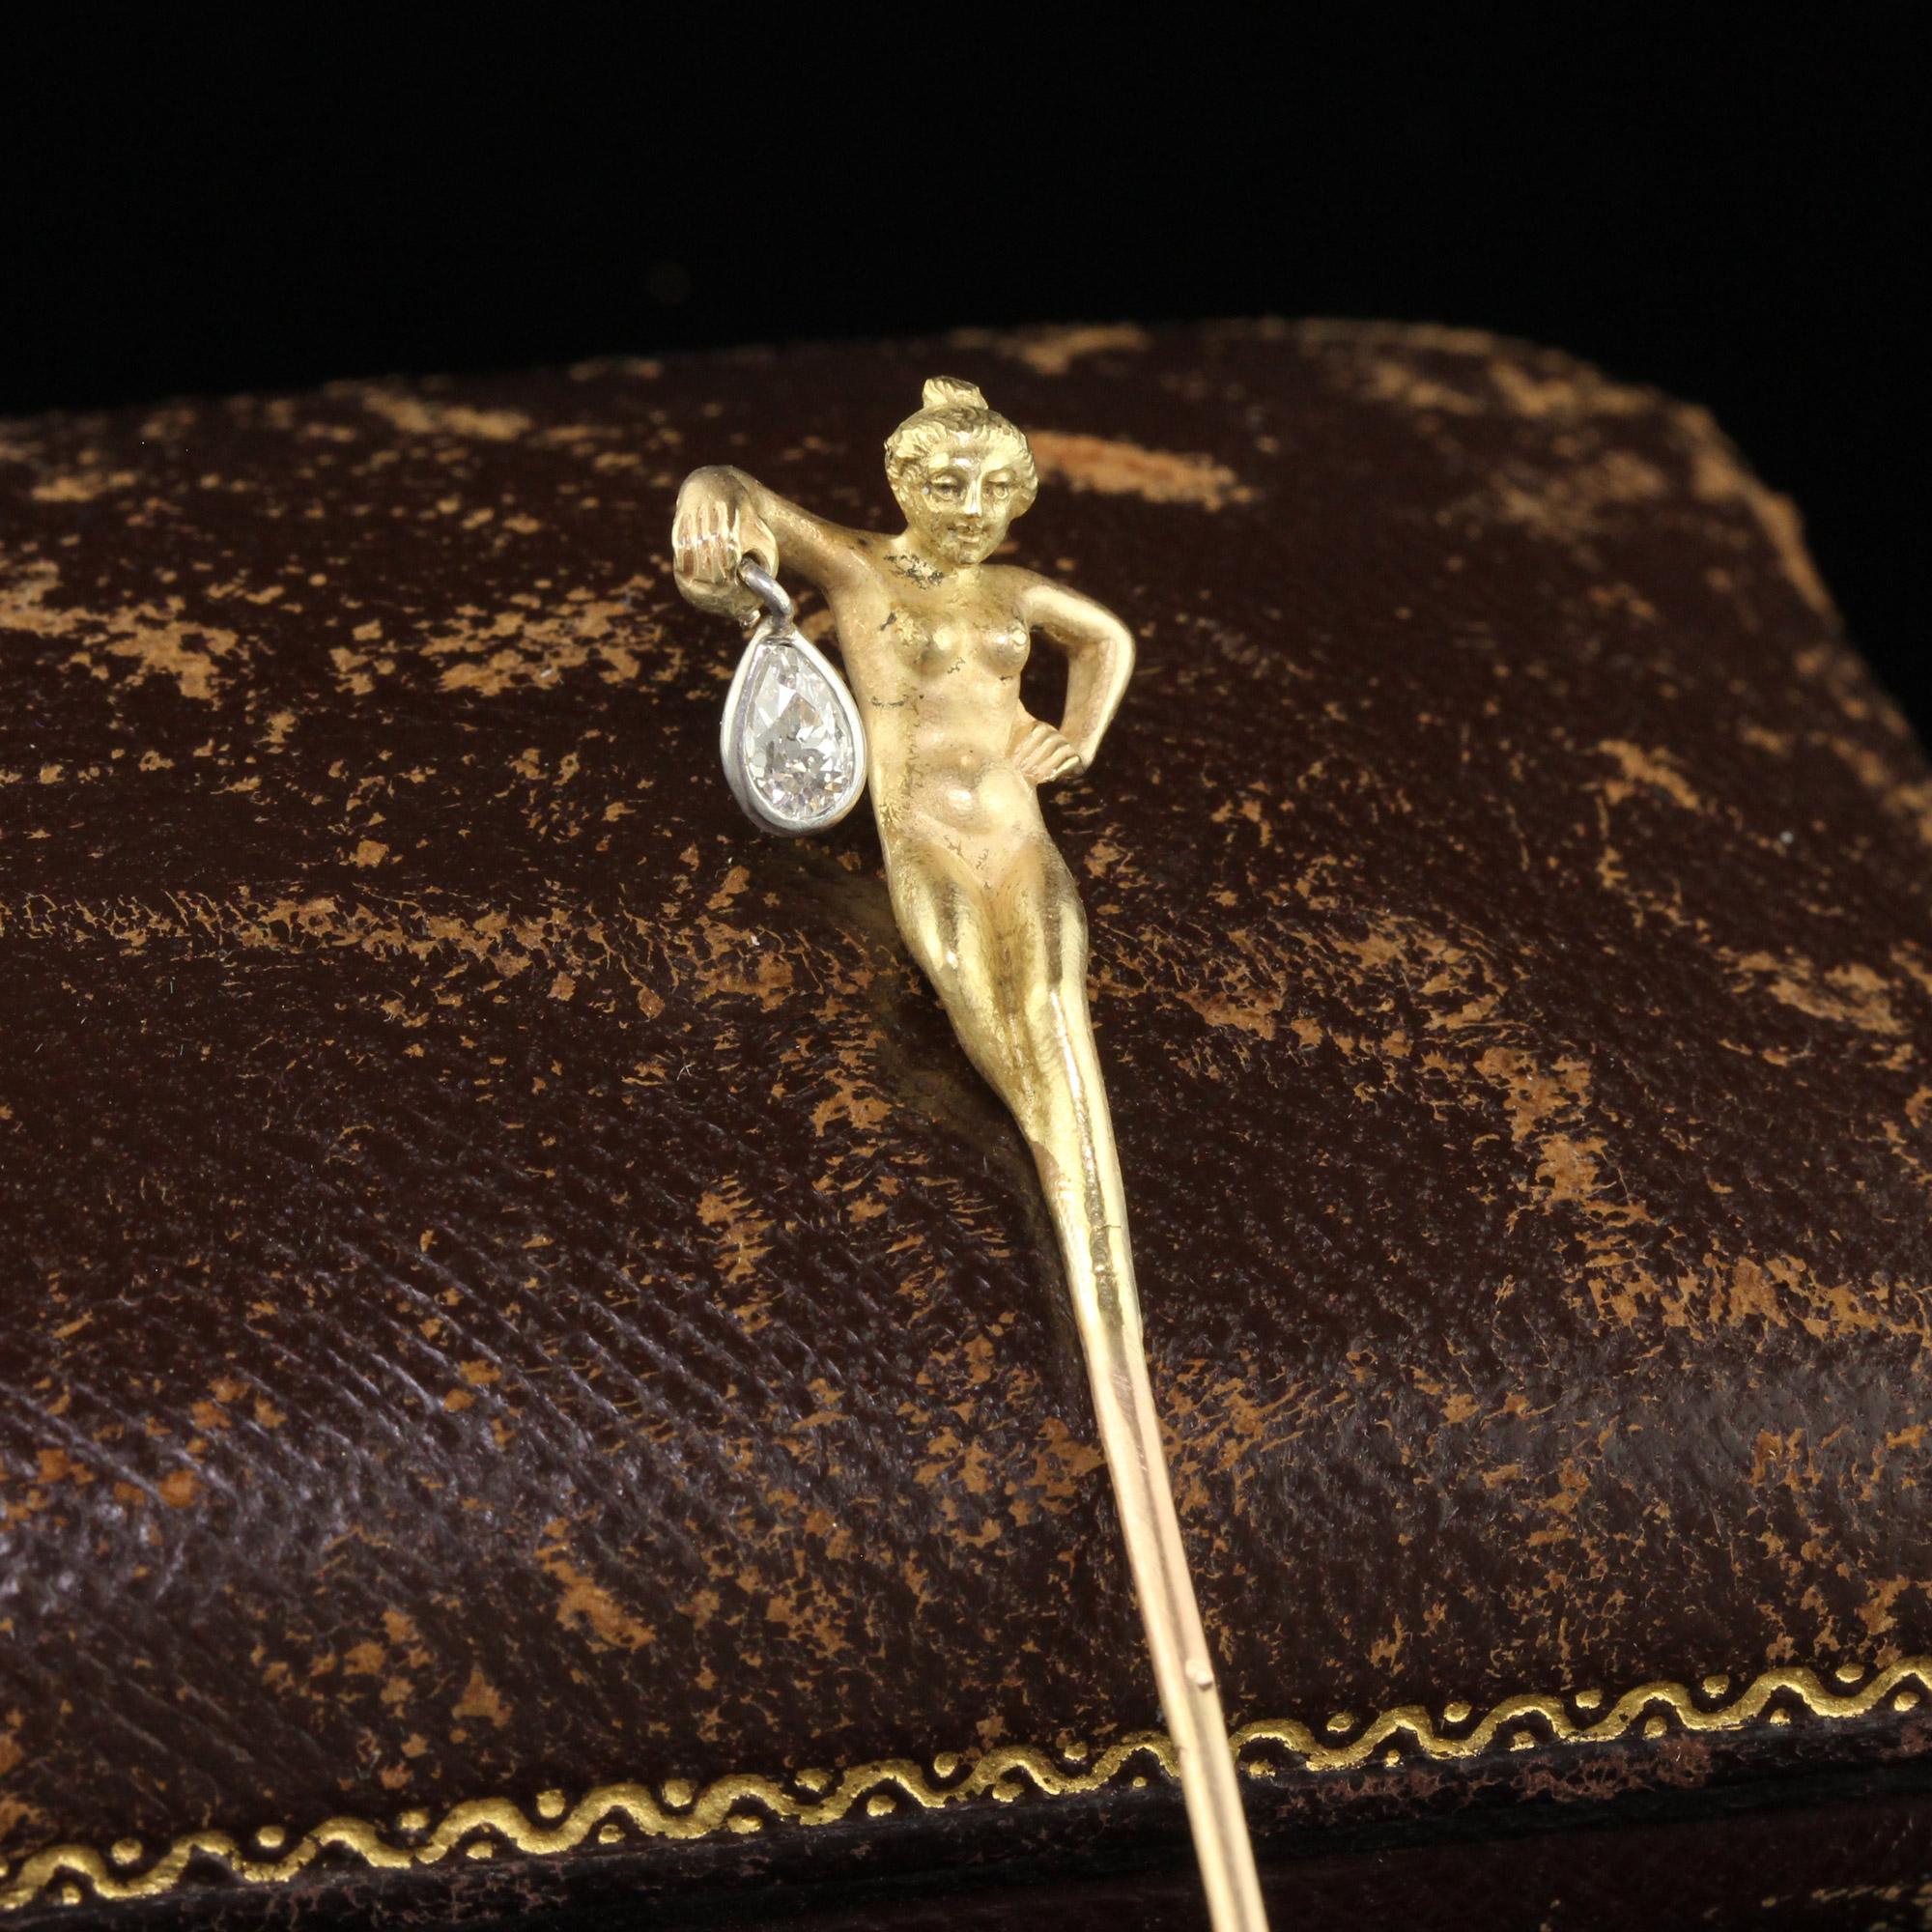 Beautiful Antique Art Nouveau French 18K Gold Old Pear Diamond Lorette Woman Stick Pin. This incredible stick pin is crafted in 18k yellow gold. The pin features an undressed woman walking while holding a lantern which is the old cut pear shape